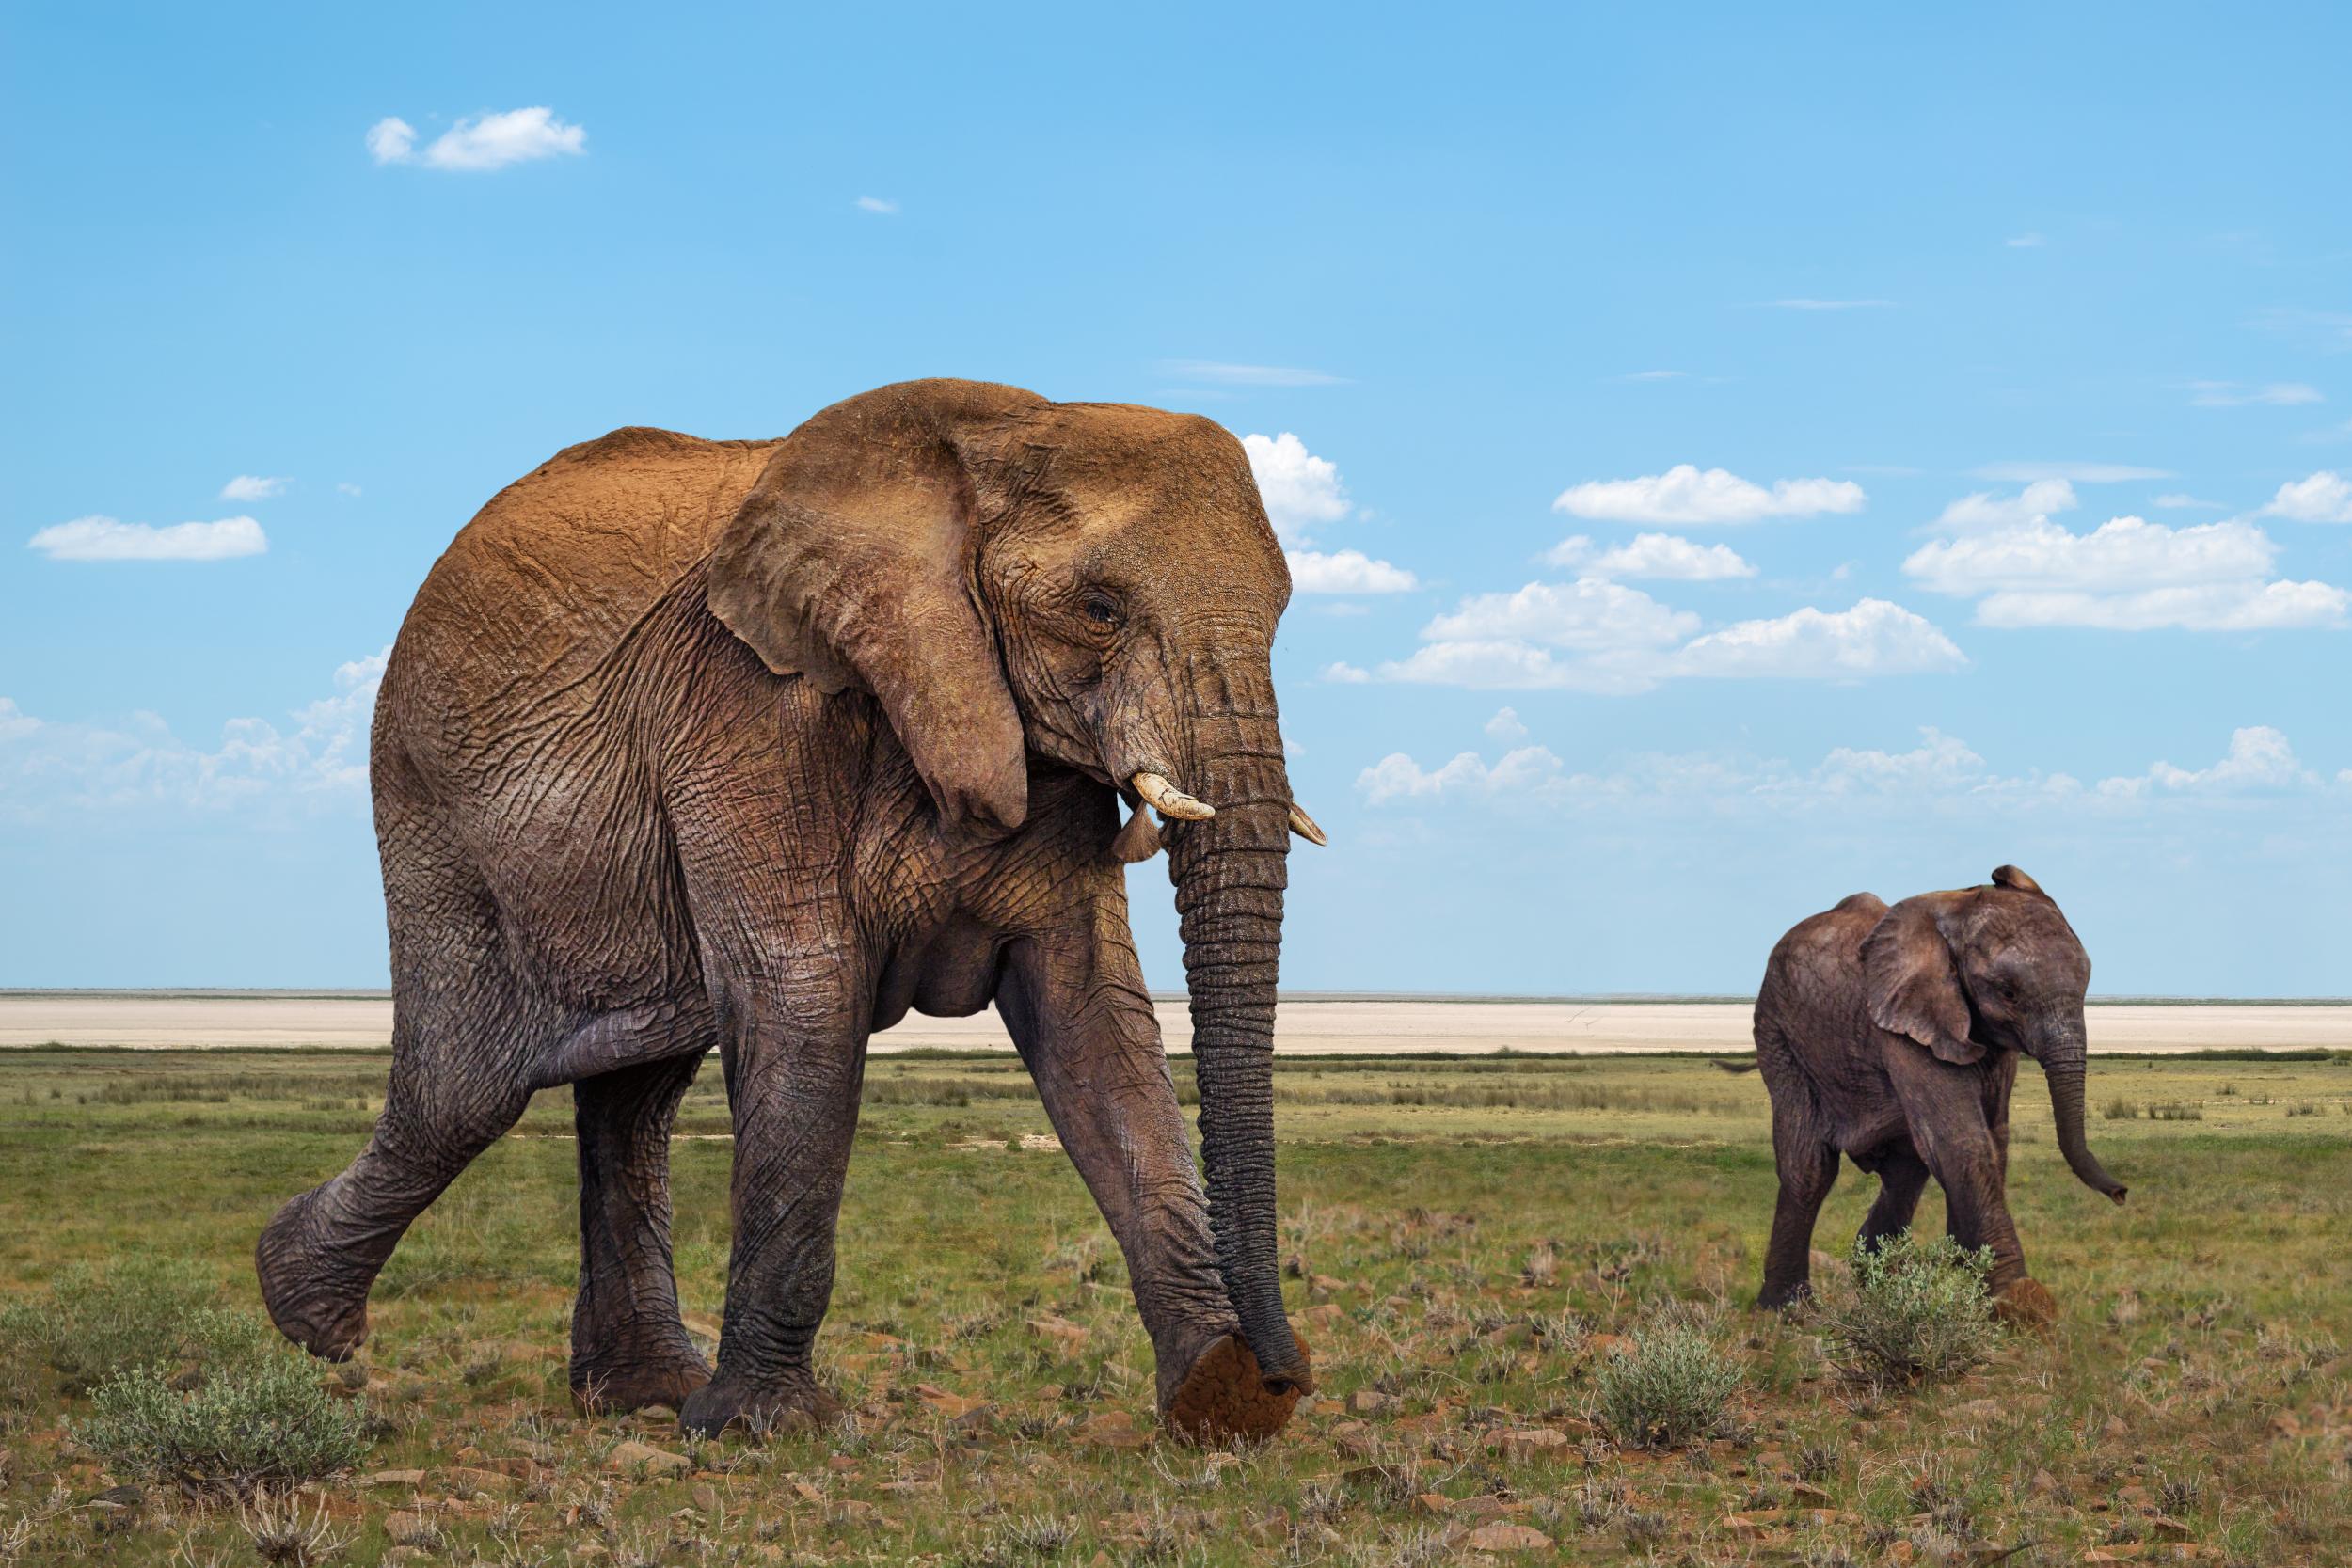 Elephants in the desert? Only in Namibia